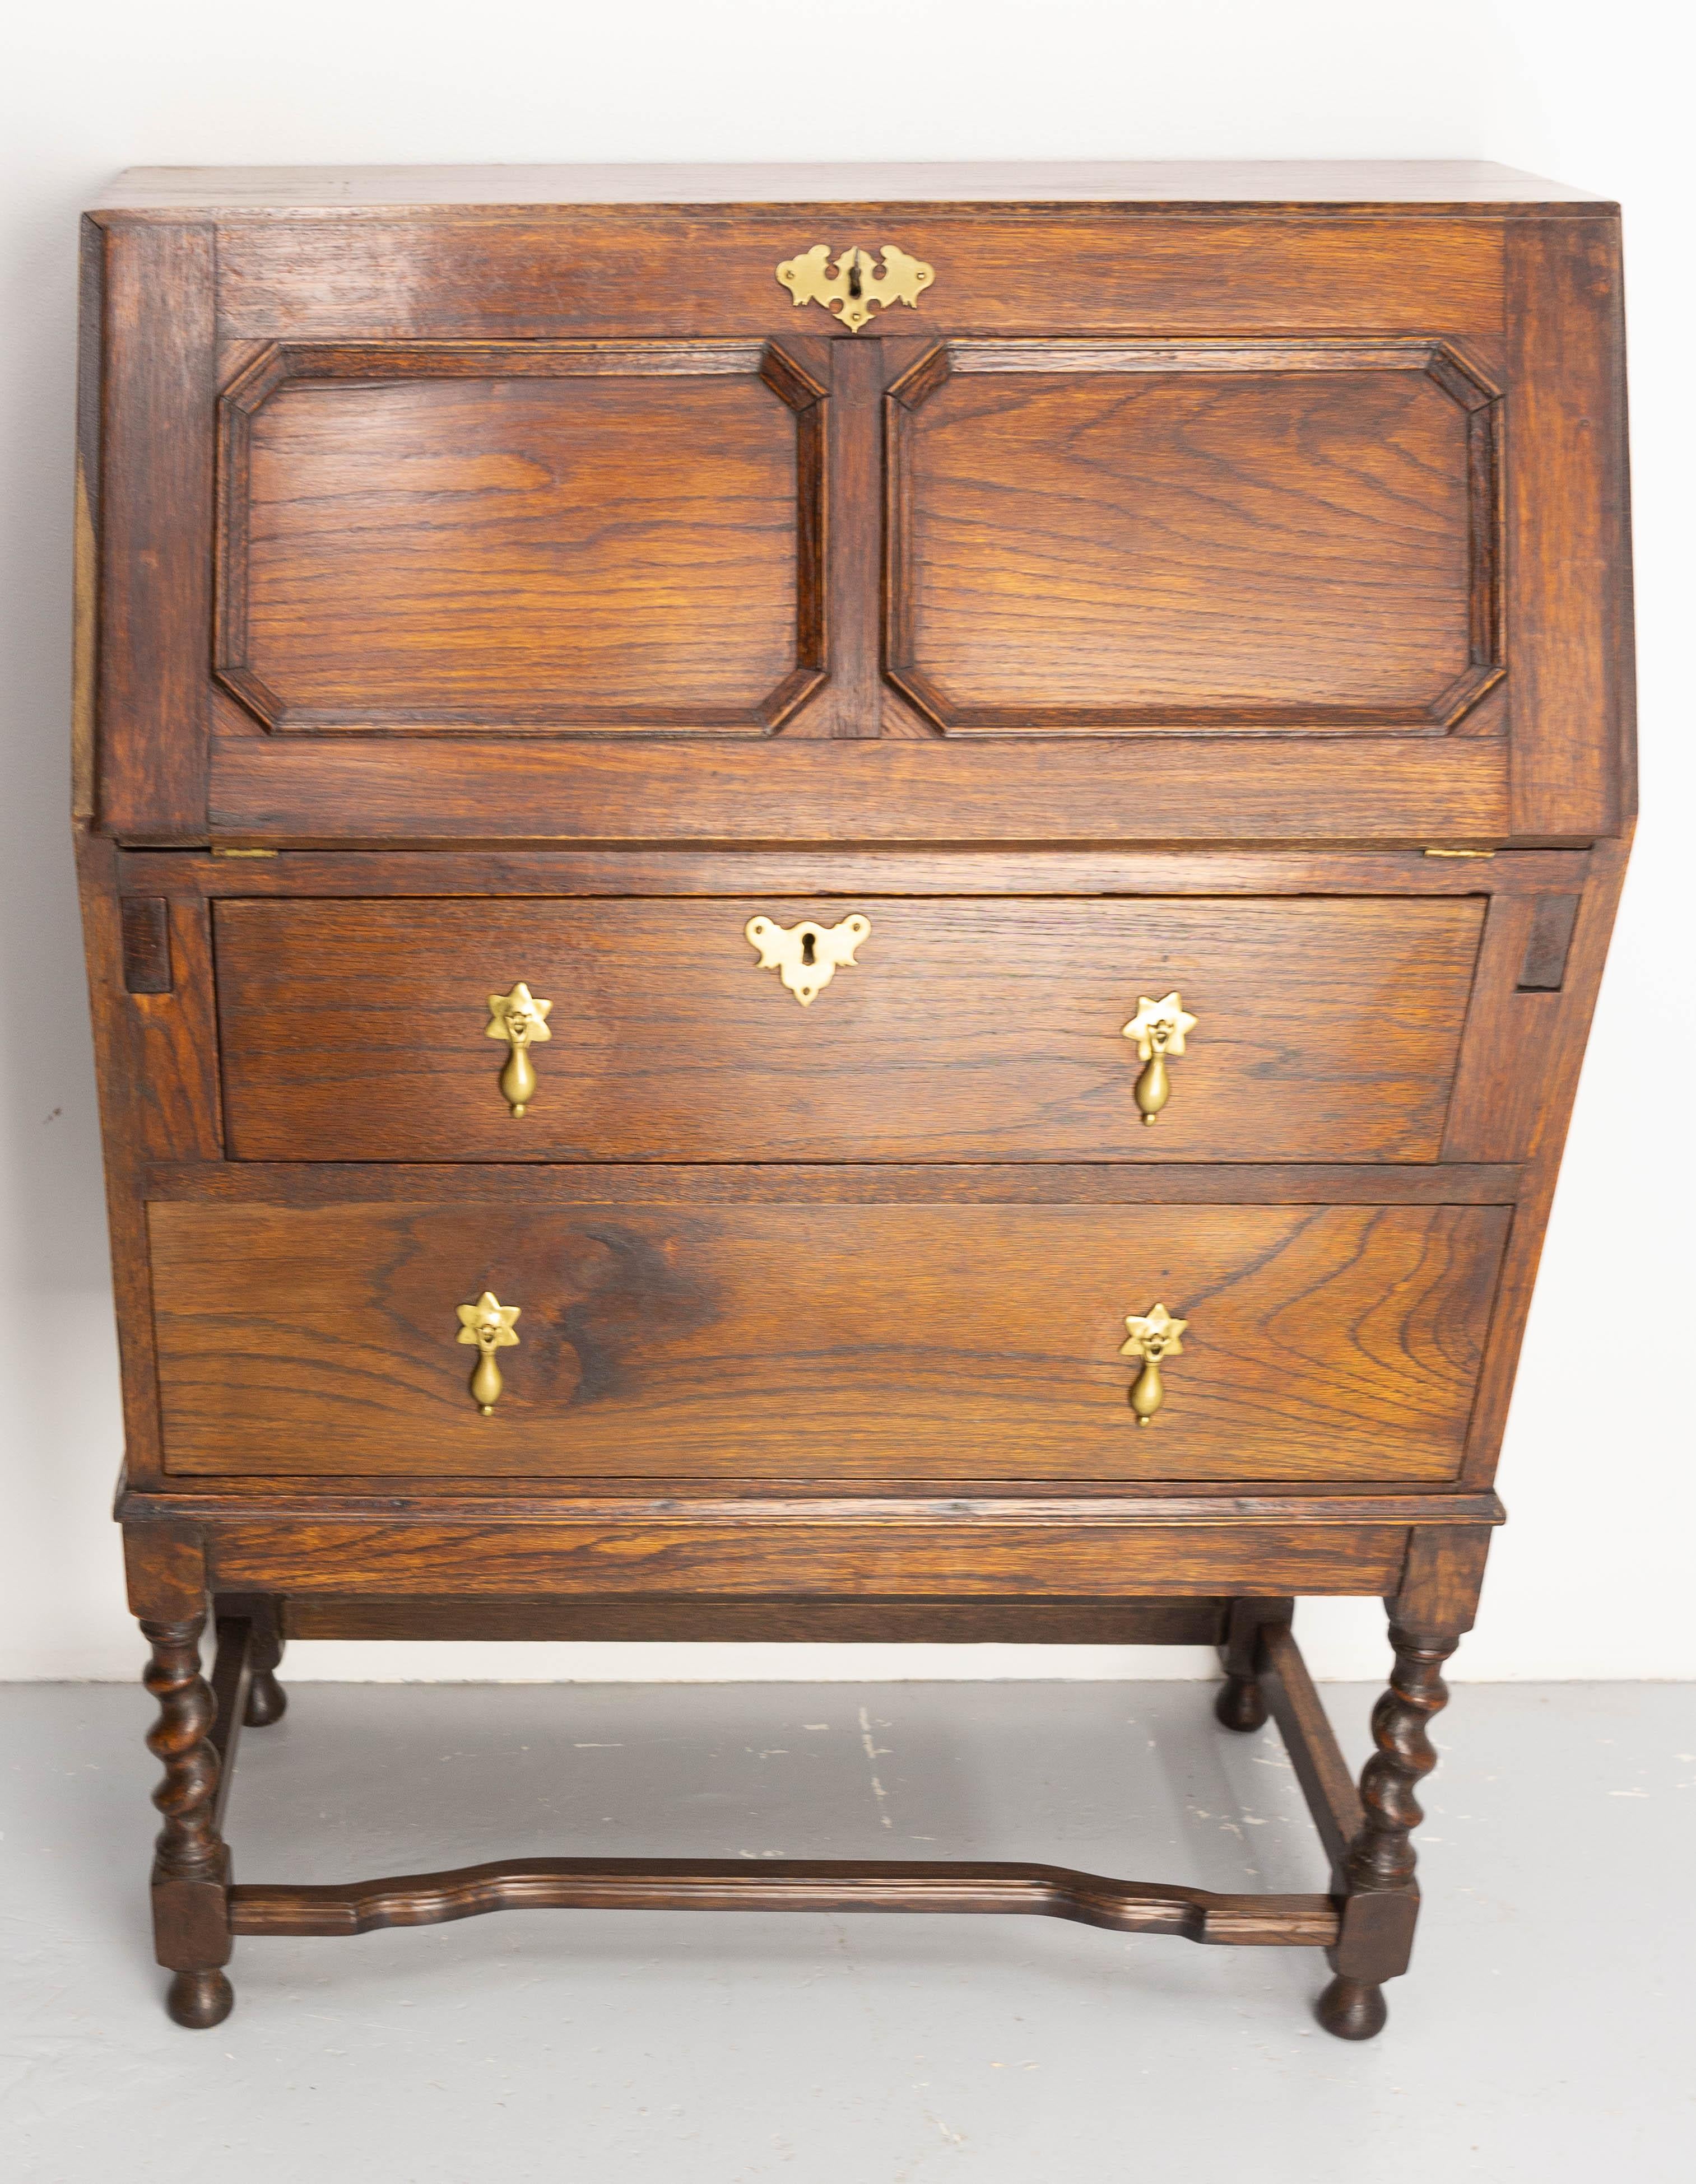 Antique english escritoire secretaire cabinet, made circa 1920
Oak and leather
The upper part of the cabinet opens to become the writing table it contains three little drawers.
Two big drawer in the down part.
Height of the writing table: 28.35